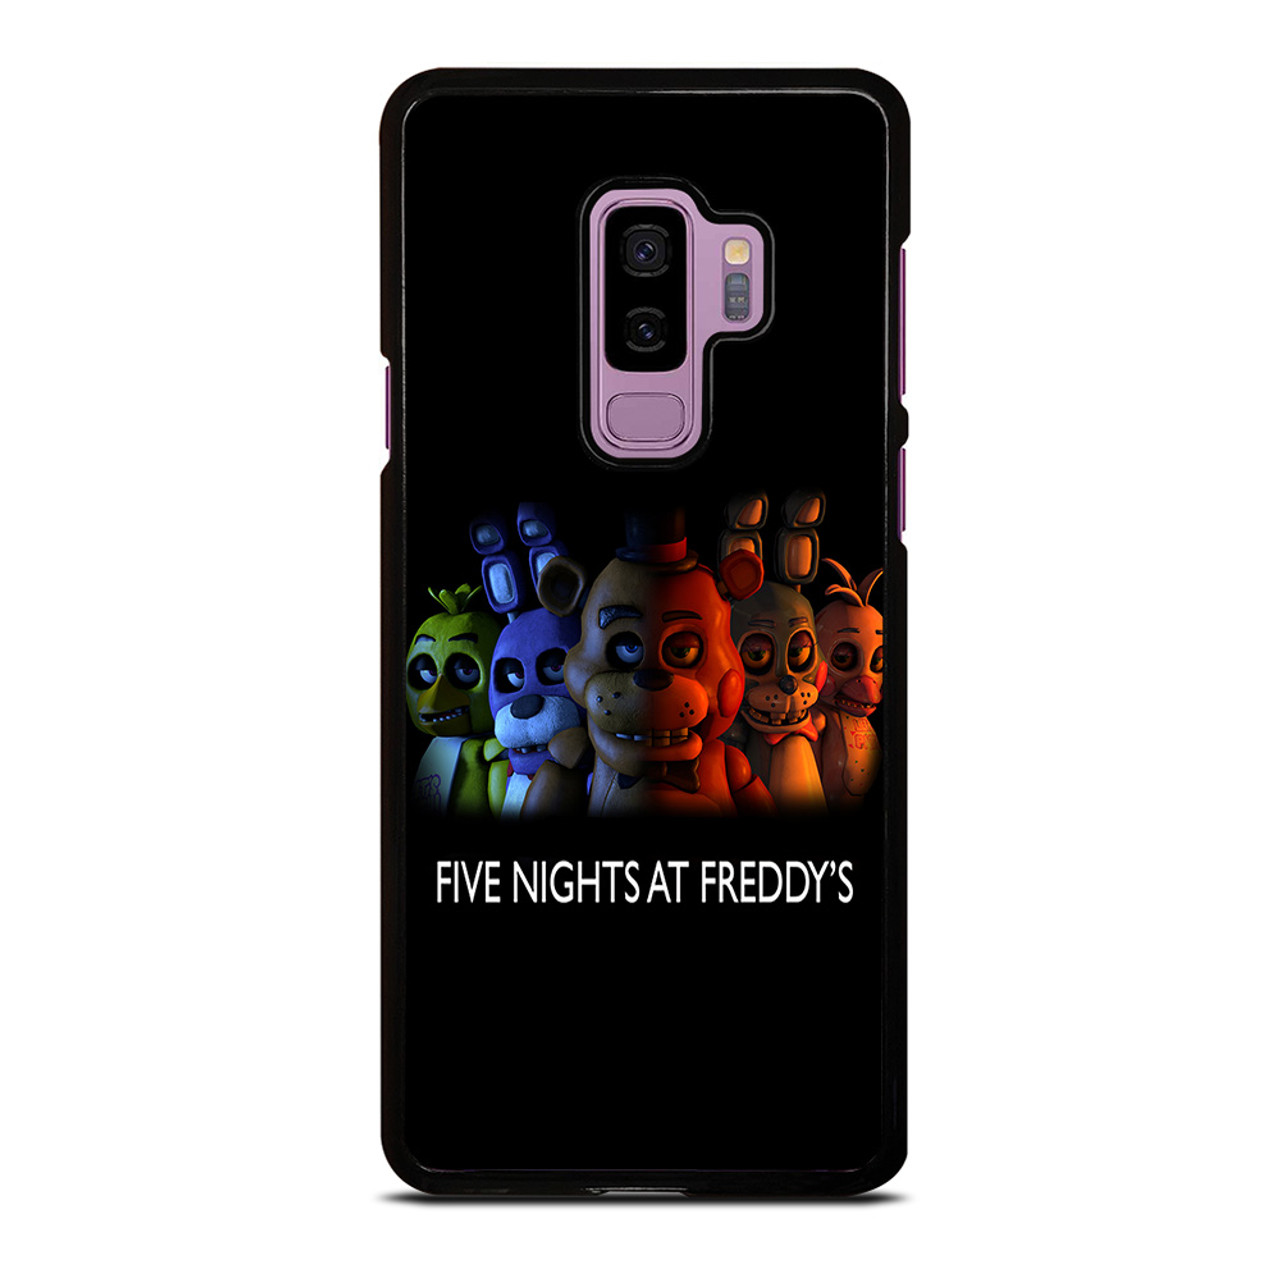 FIVE NIGHTS AT FREDDY'S FNAF iPhone 11 Pro Case Cover